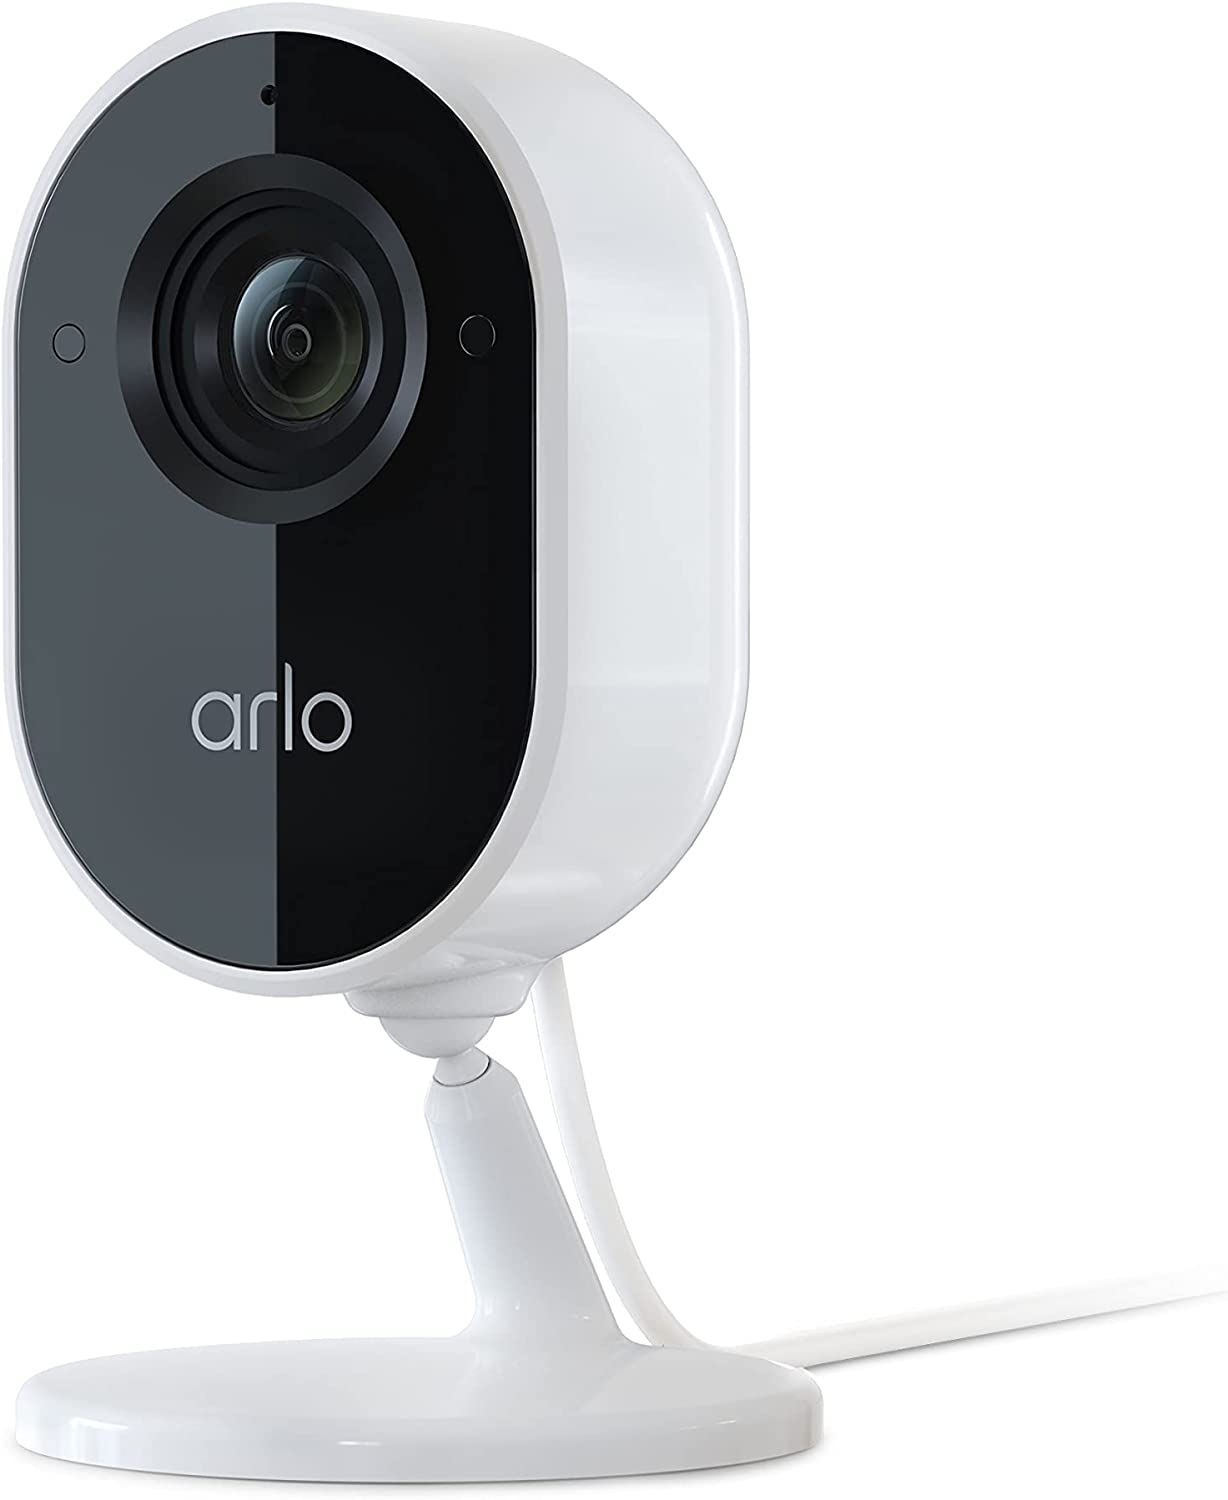 Arlo VMC2040-100NAR Essential 1080p Night Vision, 2 Way Audio Wired Indoor Camera, White - Refurbished